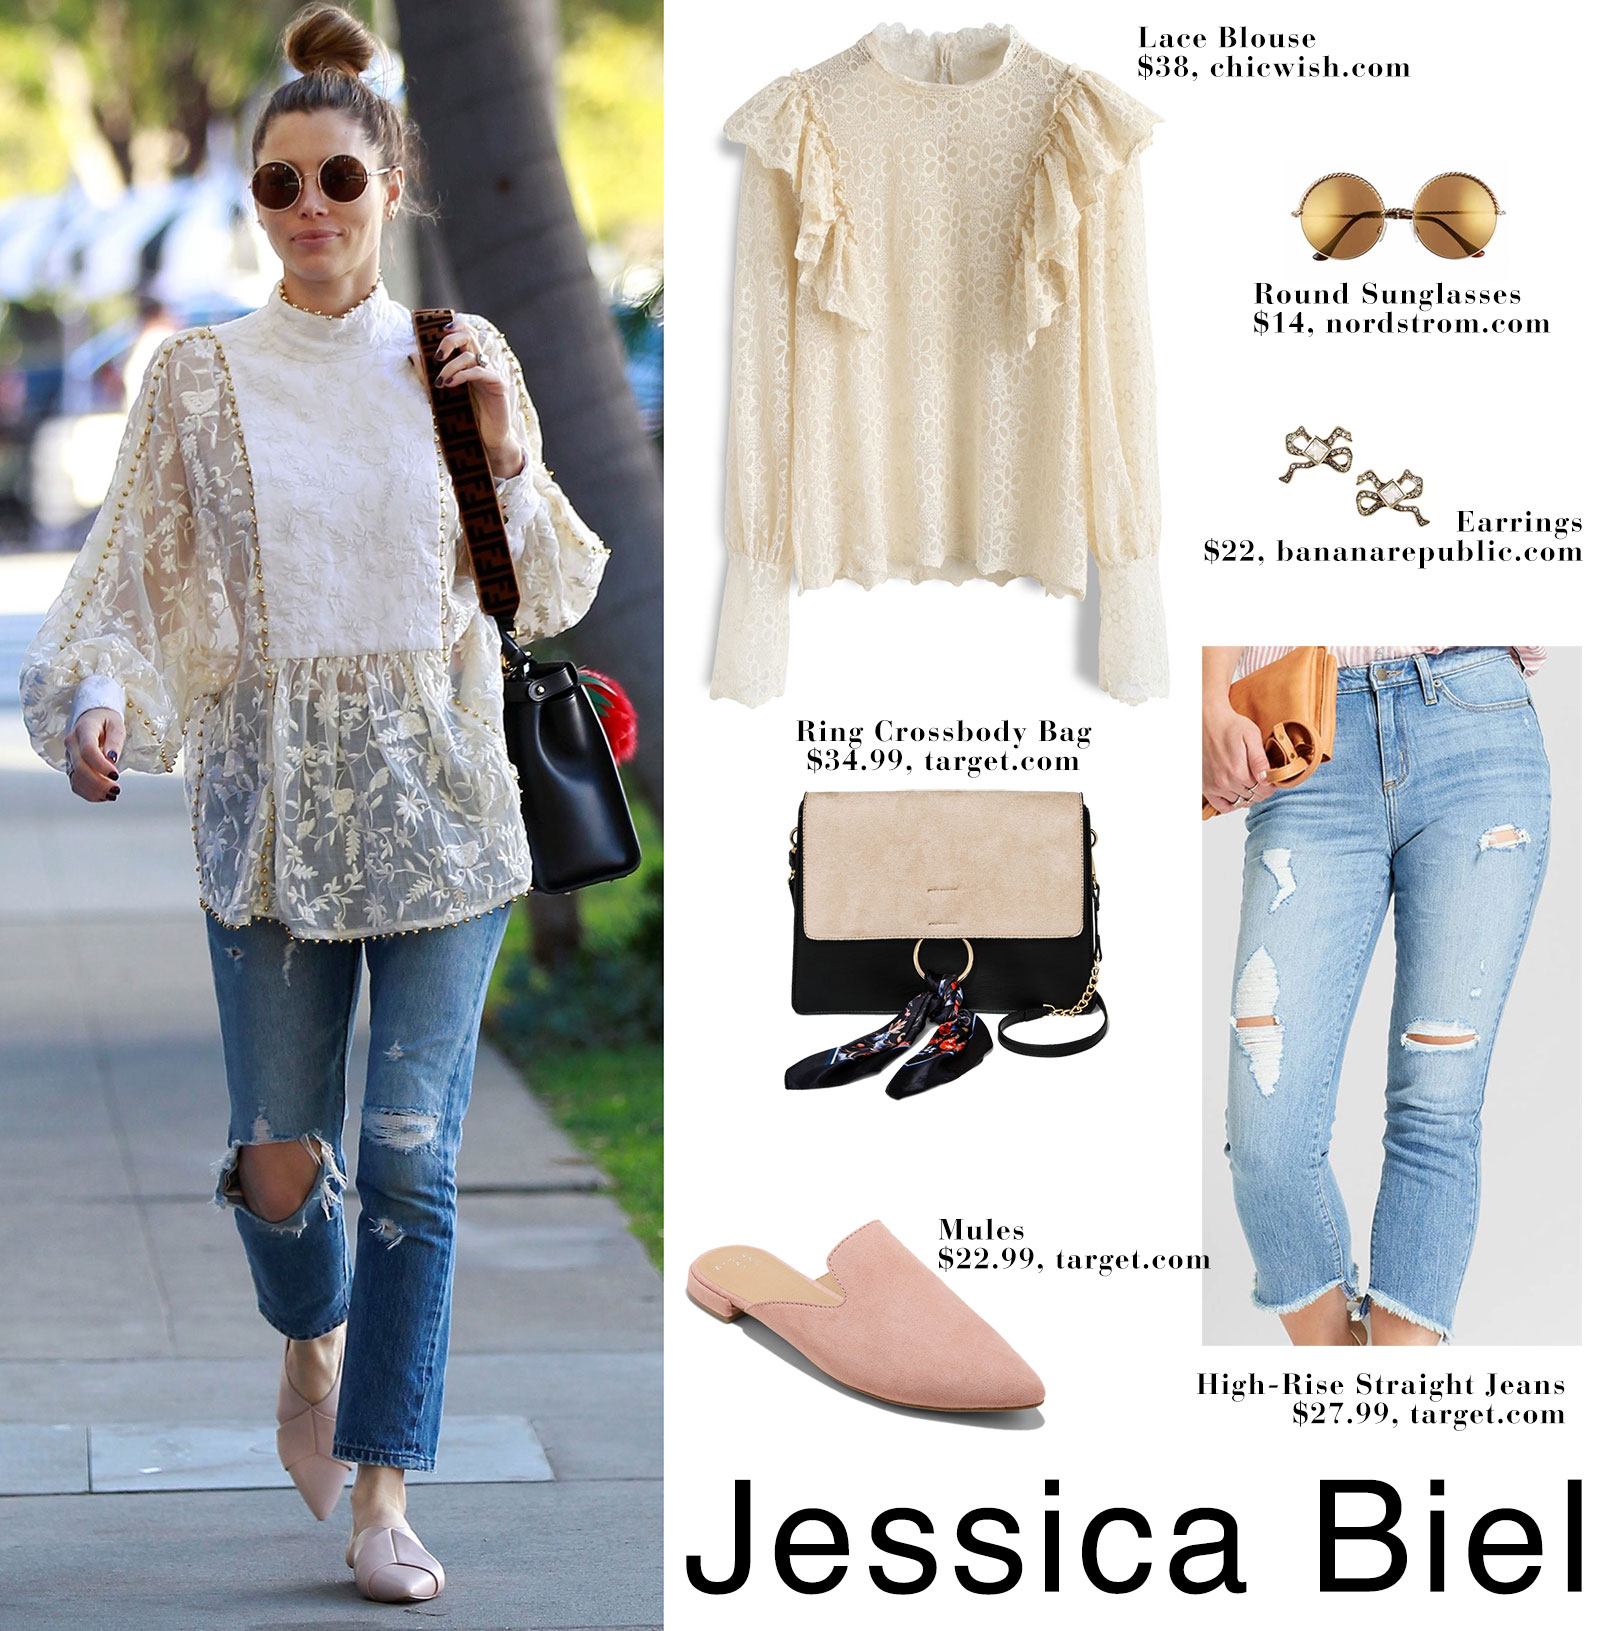 Jessica Biel's lace blouse and pointy mules look for less